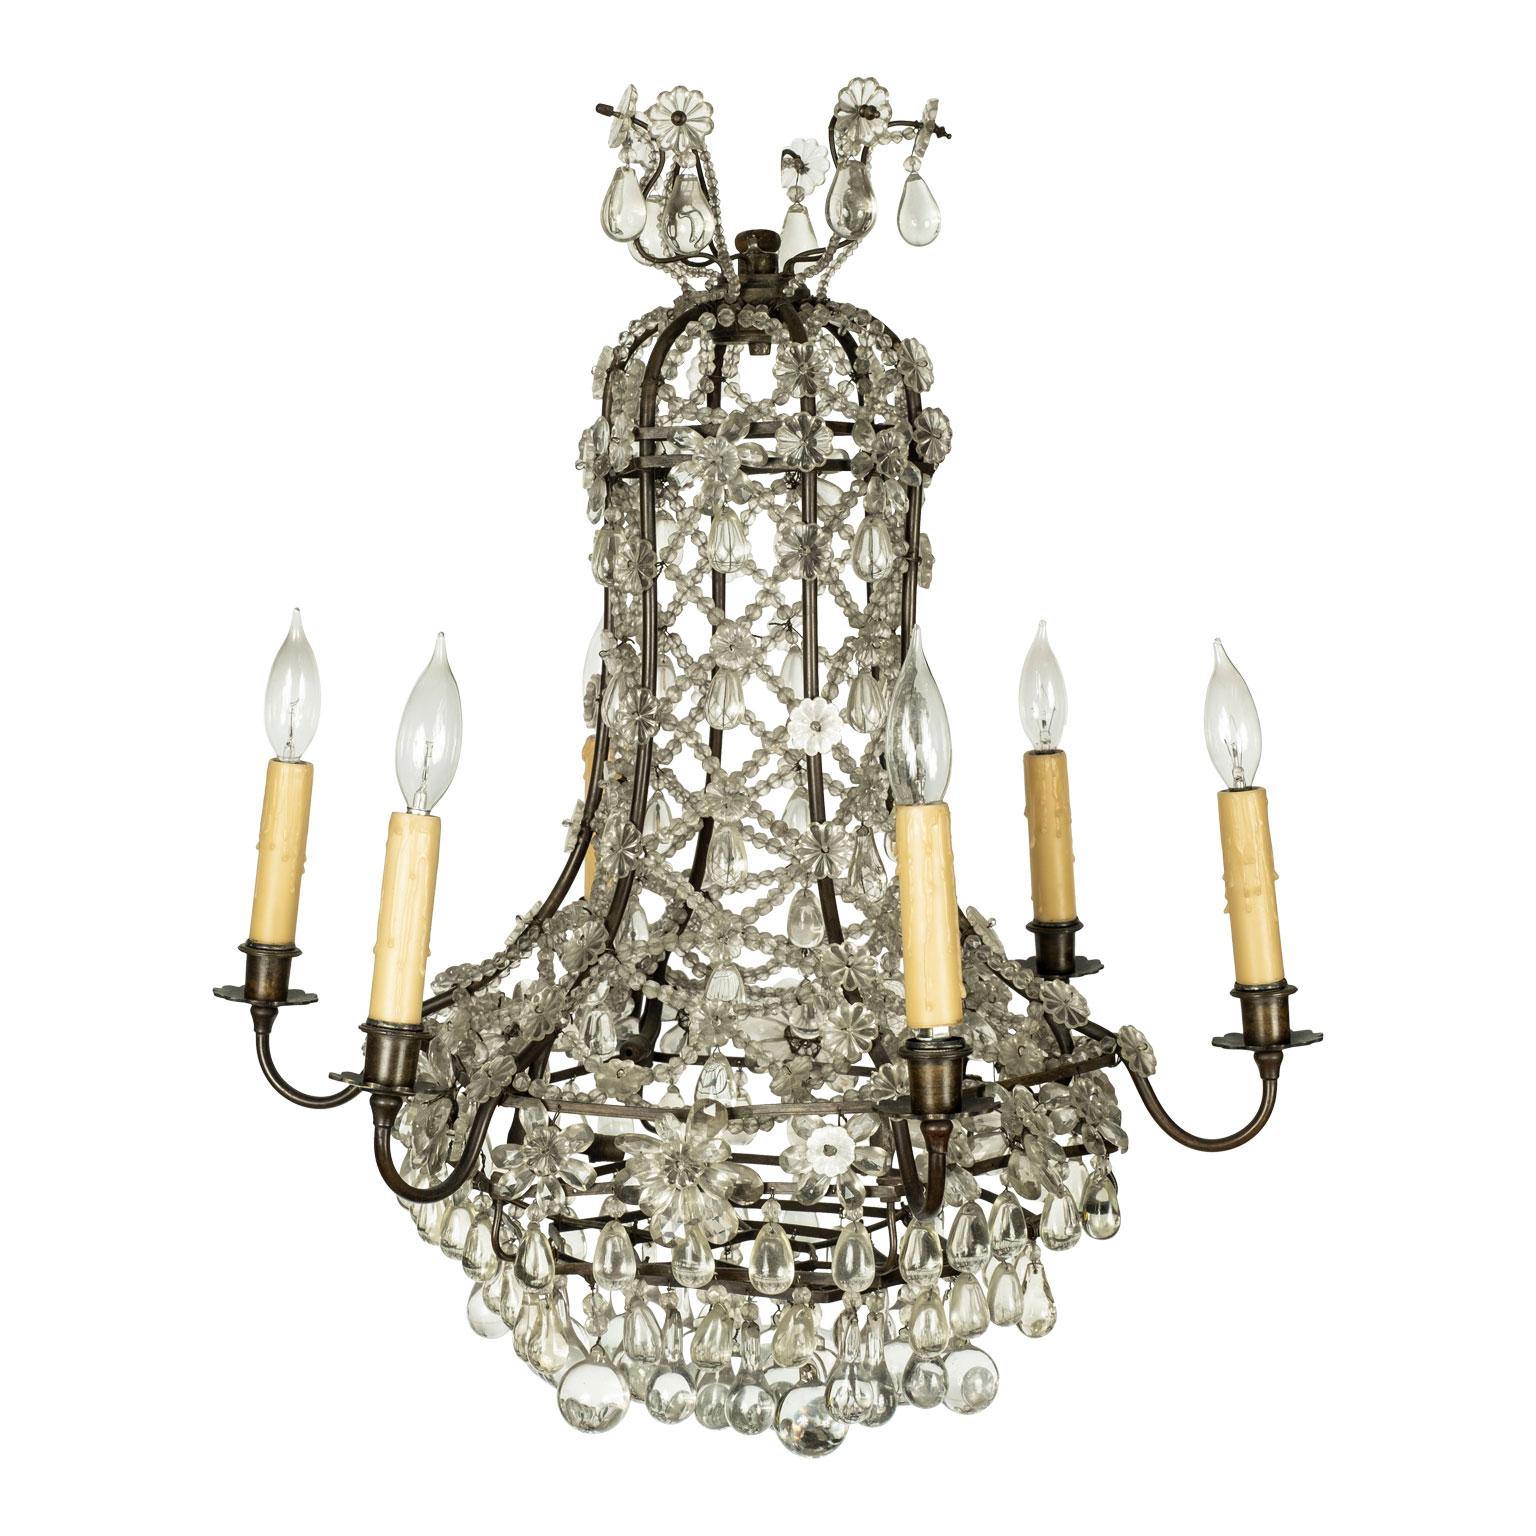 Vintage Italian glass and crystal chandelier circa 1930-1950. Brass and iron frame chandelier decorated in cut crystal prisms, pressed glass flowers, blown glass pendants and glass bead chains. Wired for use within the USA. Six arms each supporting